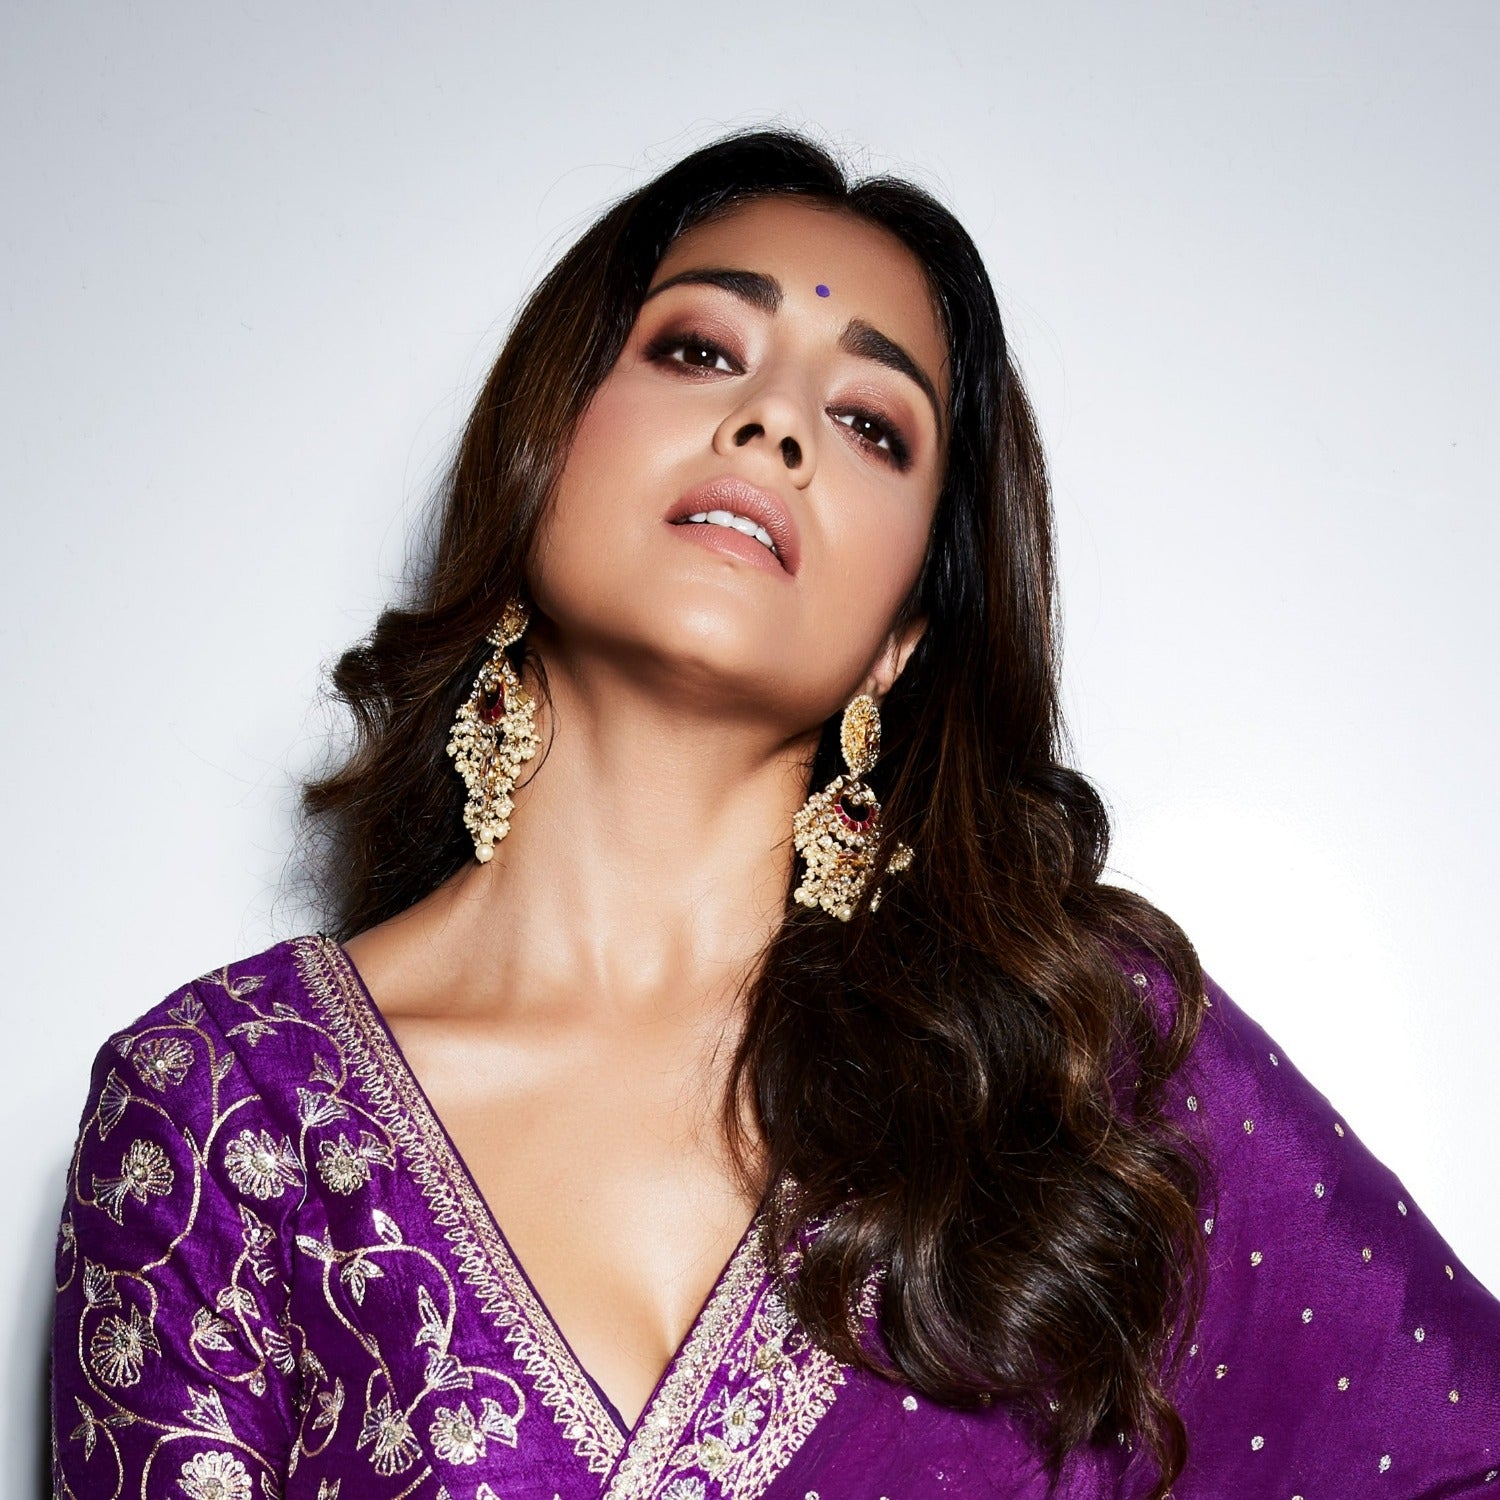 Free Photos - A Stunning Indian Woman, Adorned With Elegant Gold Jewelry,  Including A Necklace And Earrings, And Wearing A Luxurious Purple Saree.  Her Outfit Is Complemented By A Well-matched Bindi And